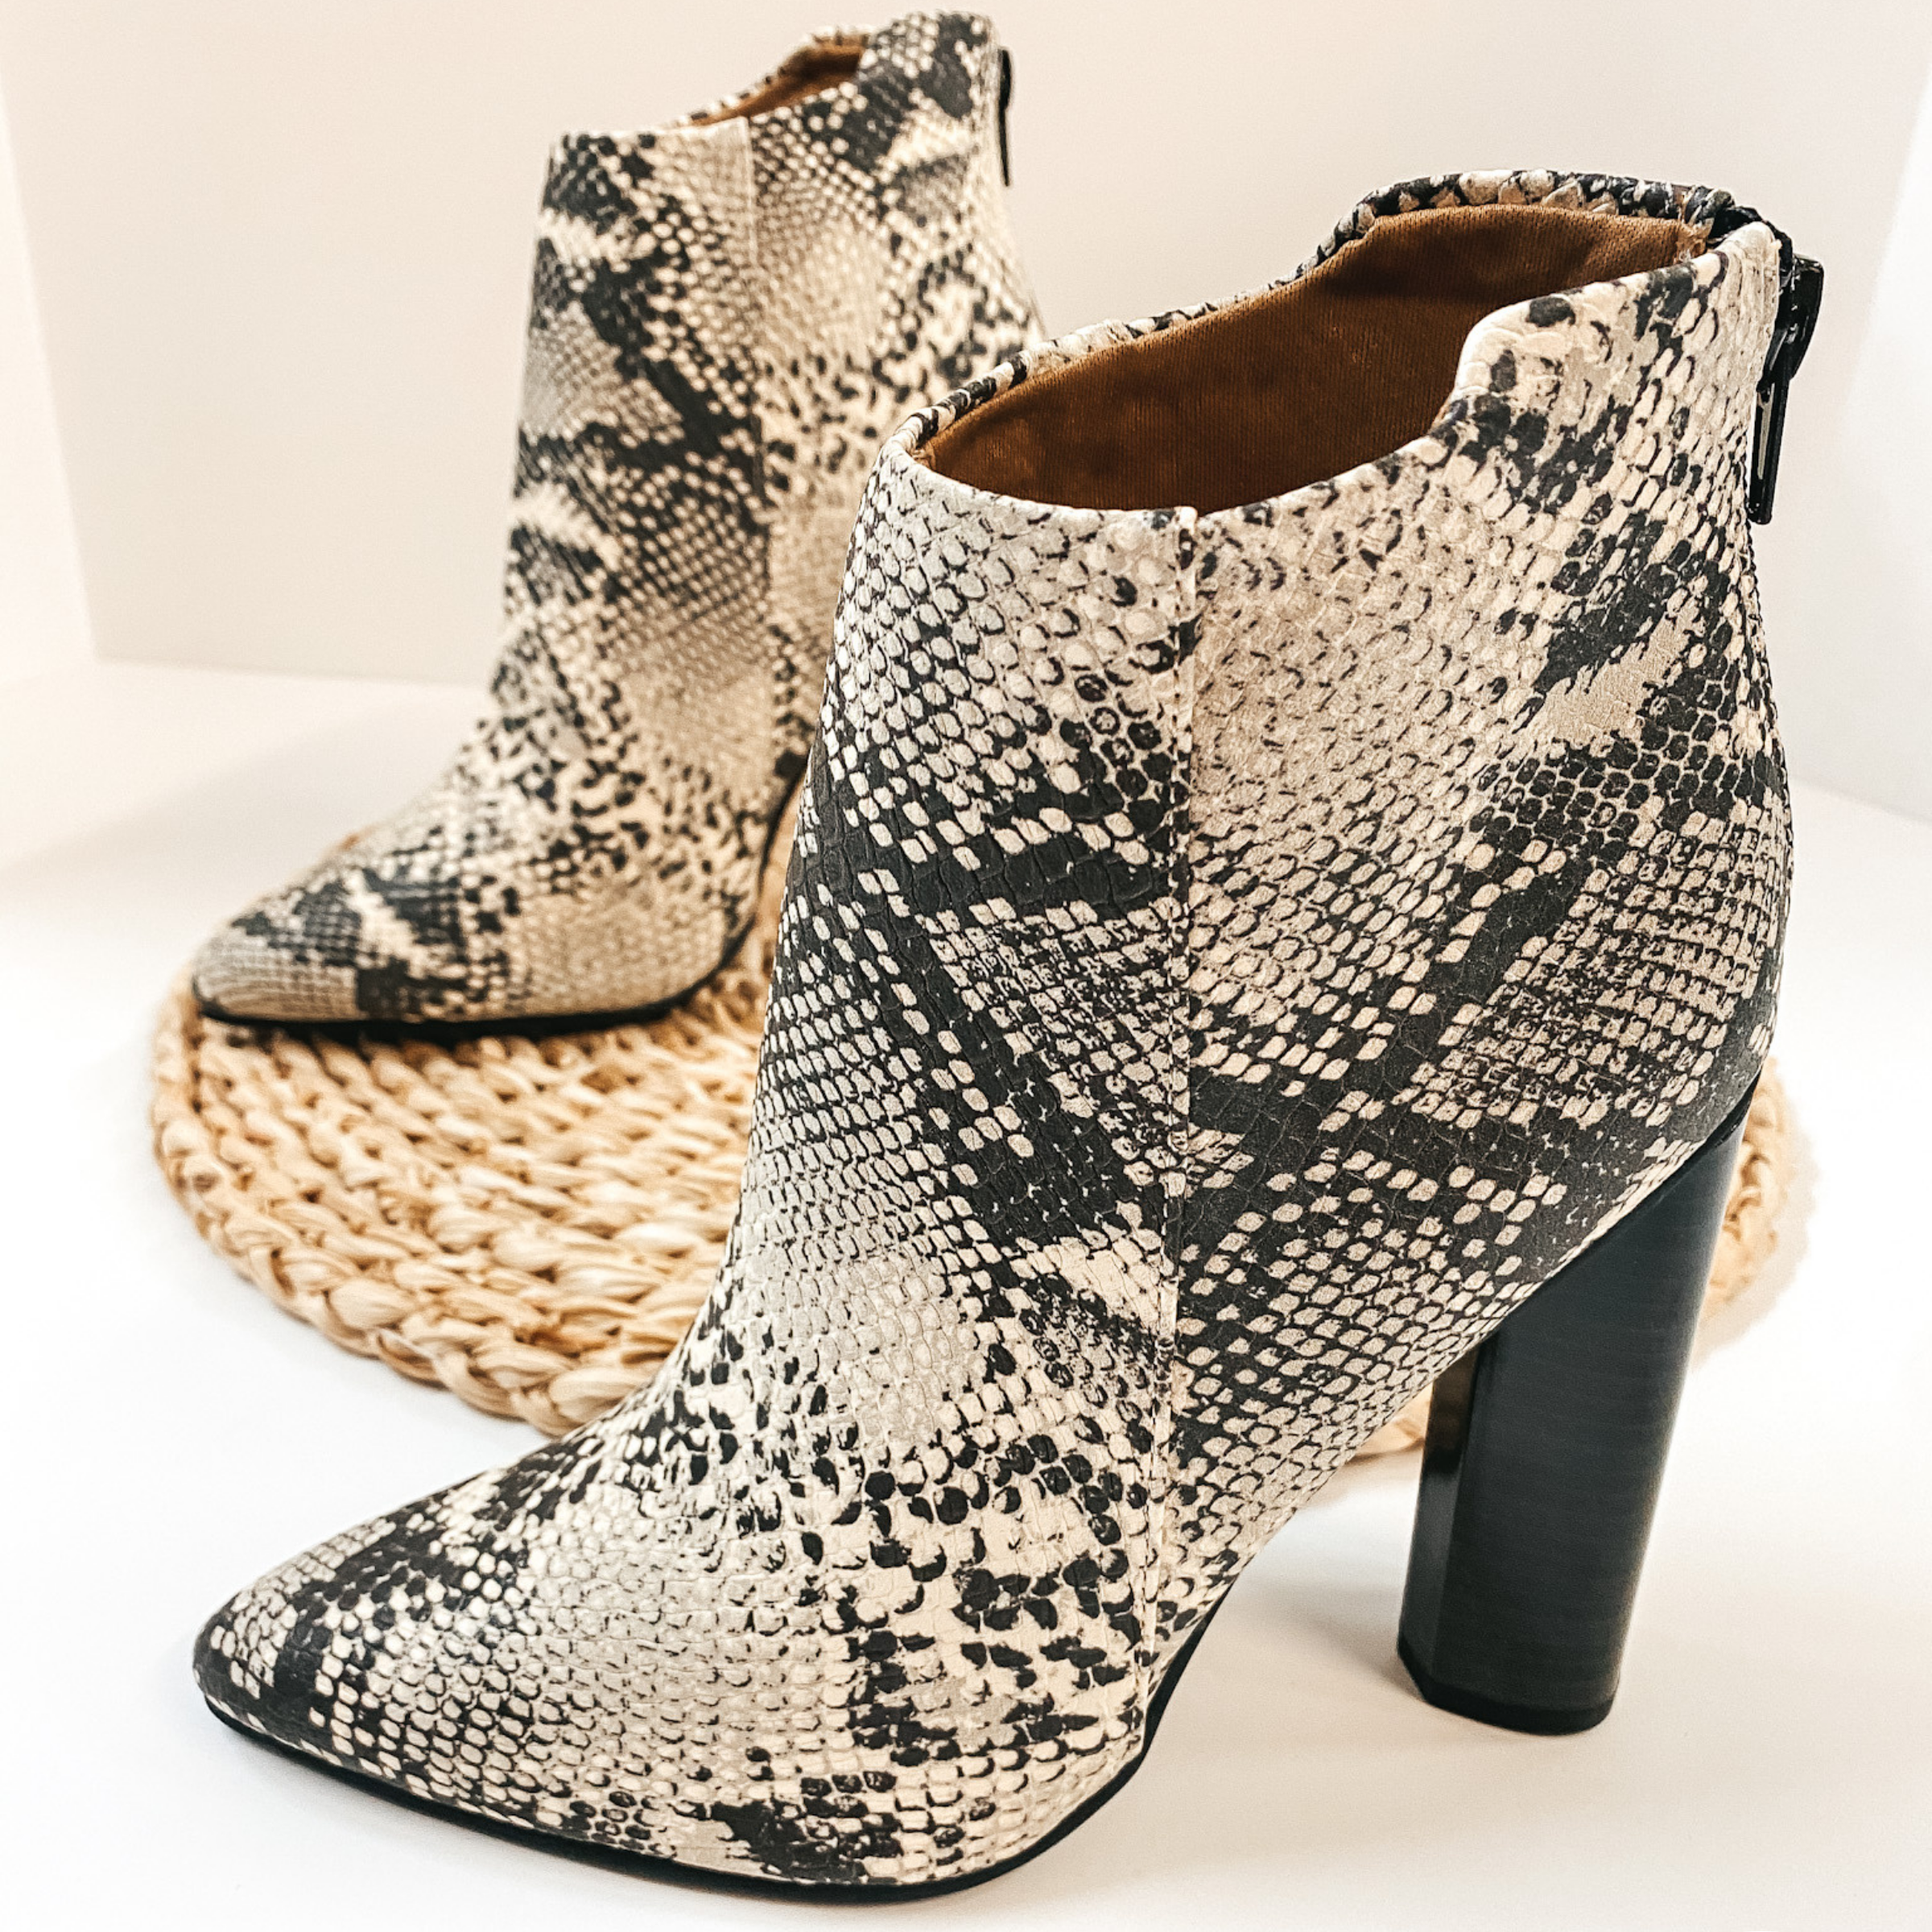 Last Chance Size 6 & 7 | Downtown Dreamer Heeled Ankle Booties in Snake Print - Giddy Up Glamour Boutique